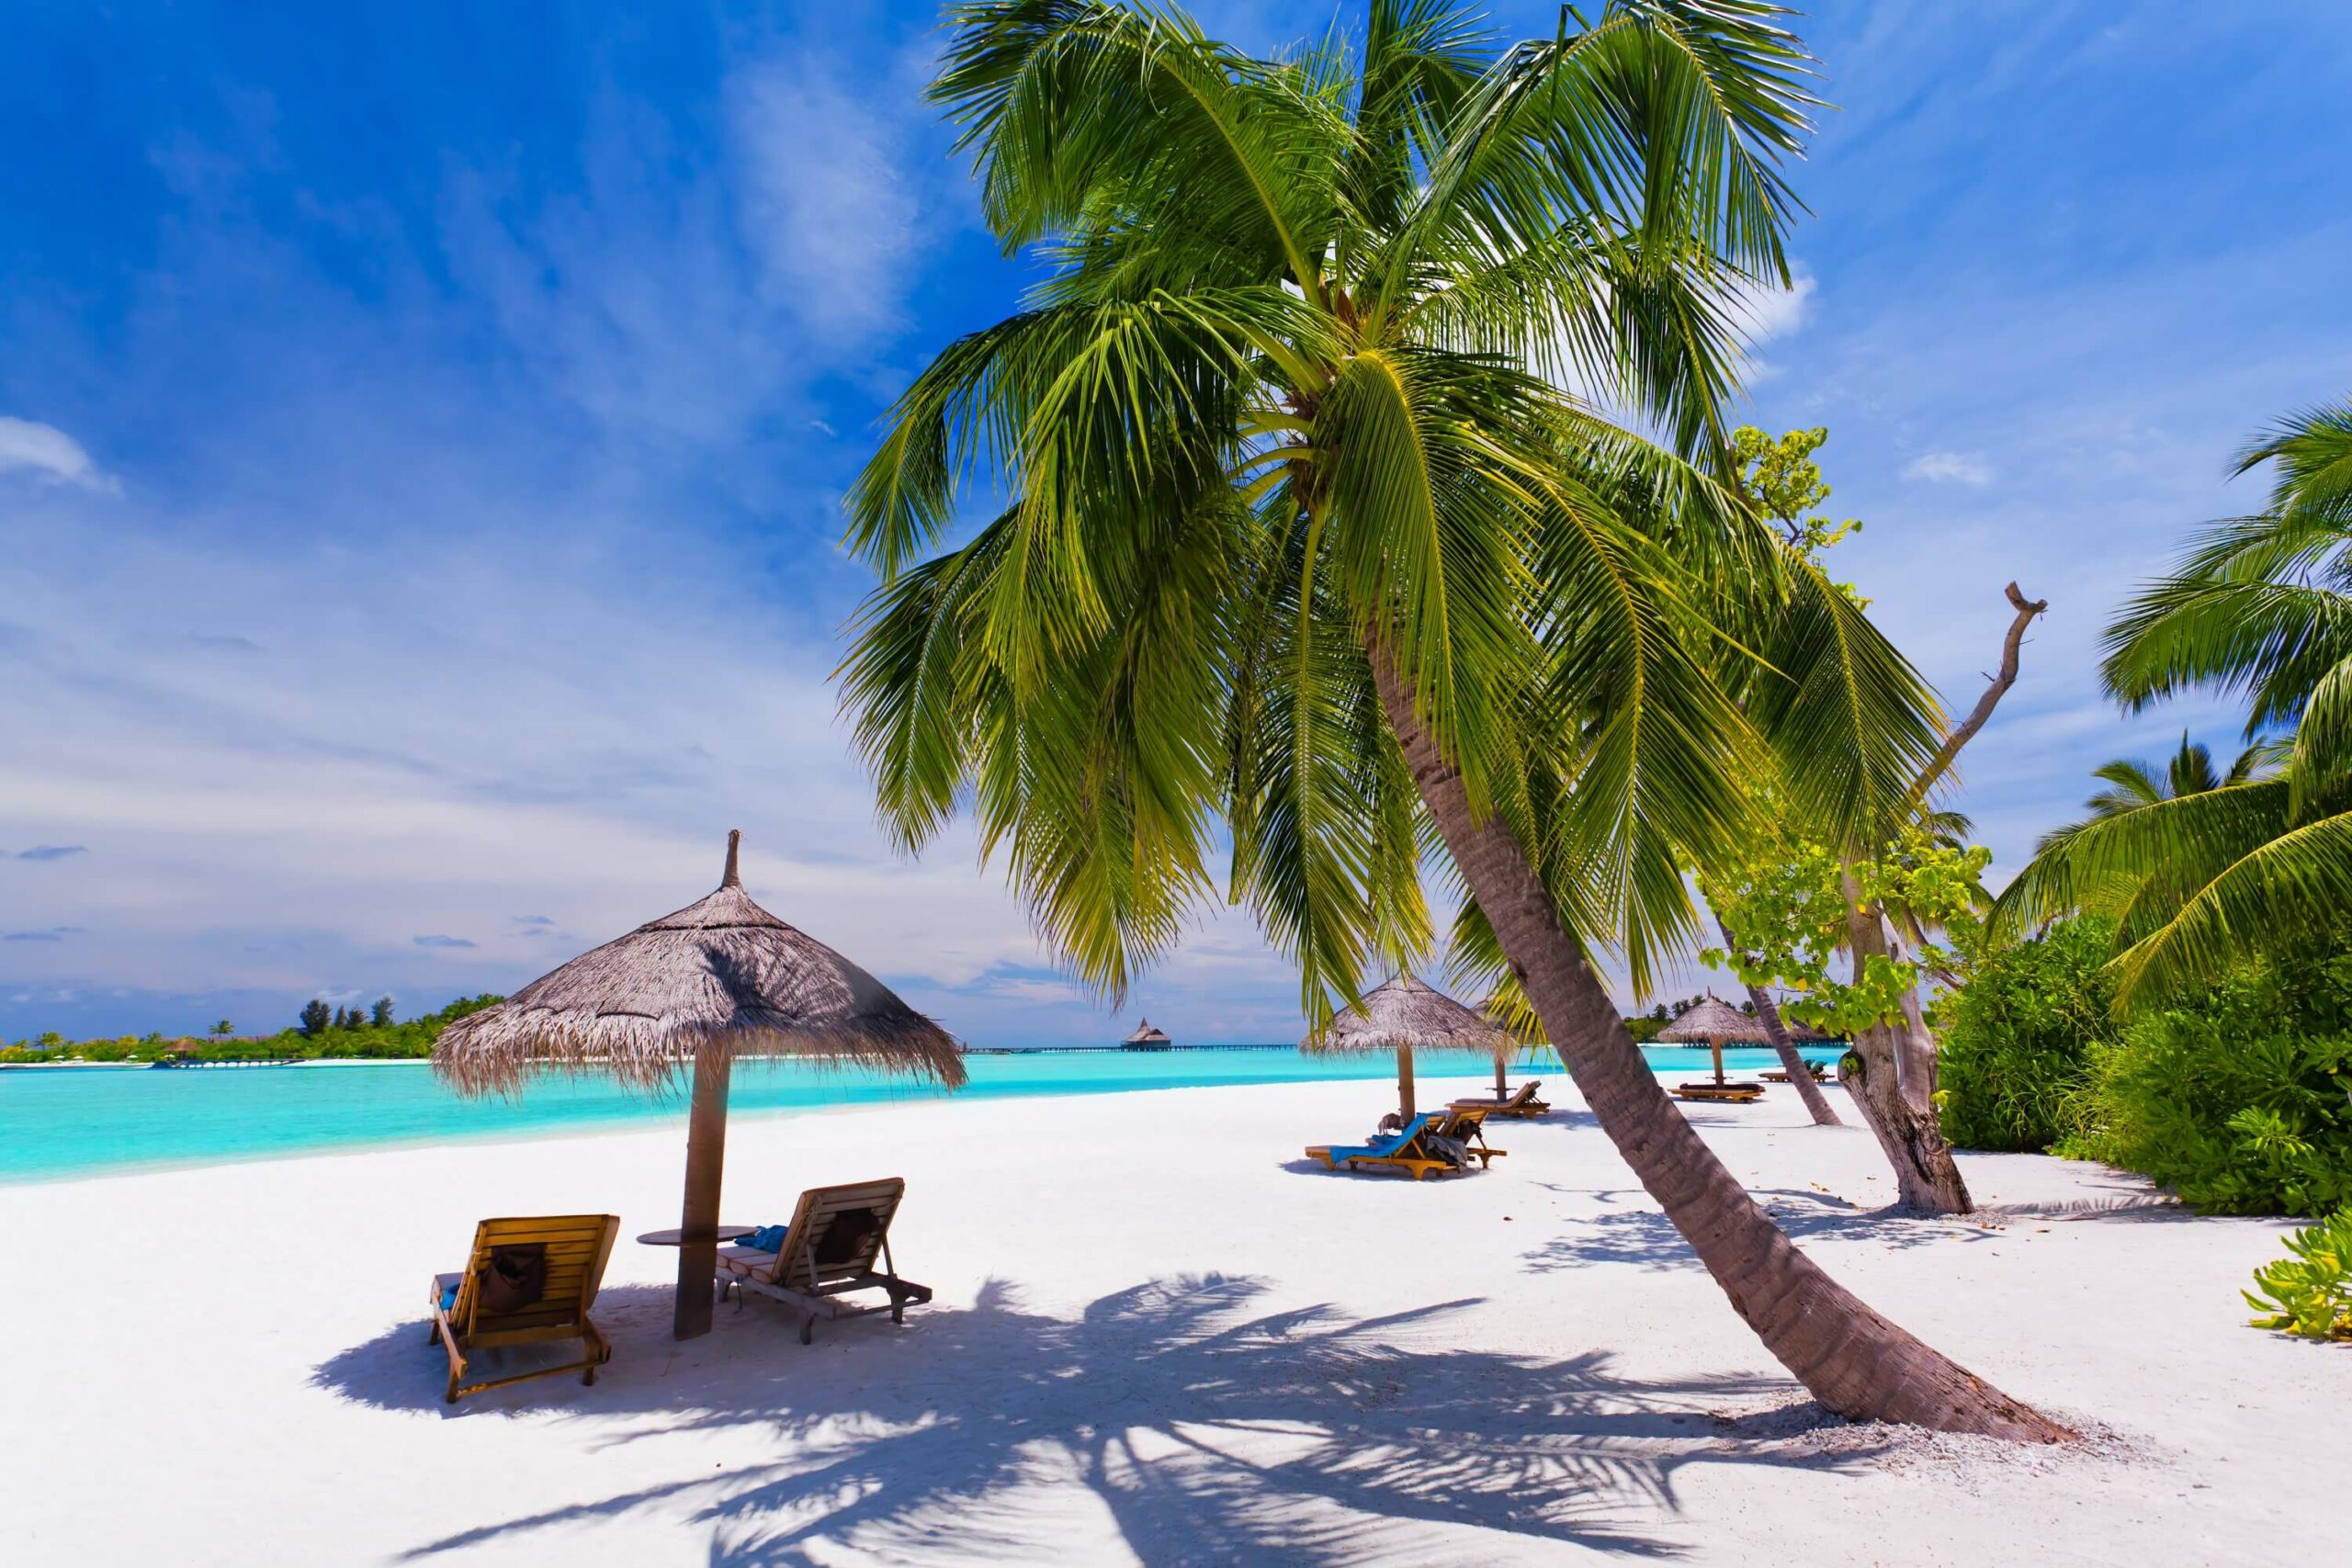 A white sandy beach with palm trees is the perfect setting for beach holidays.